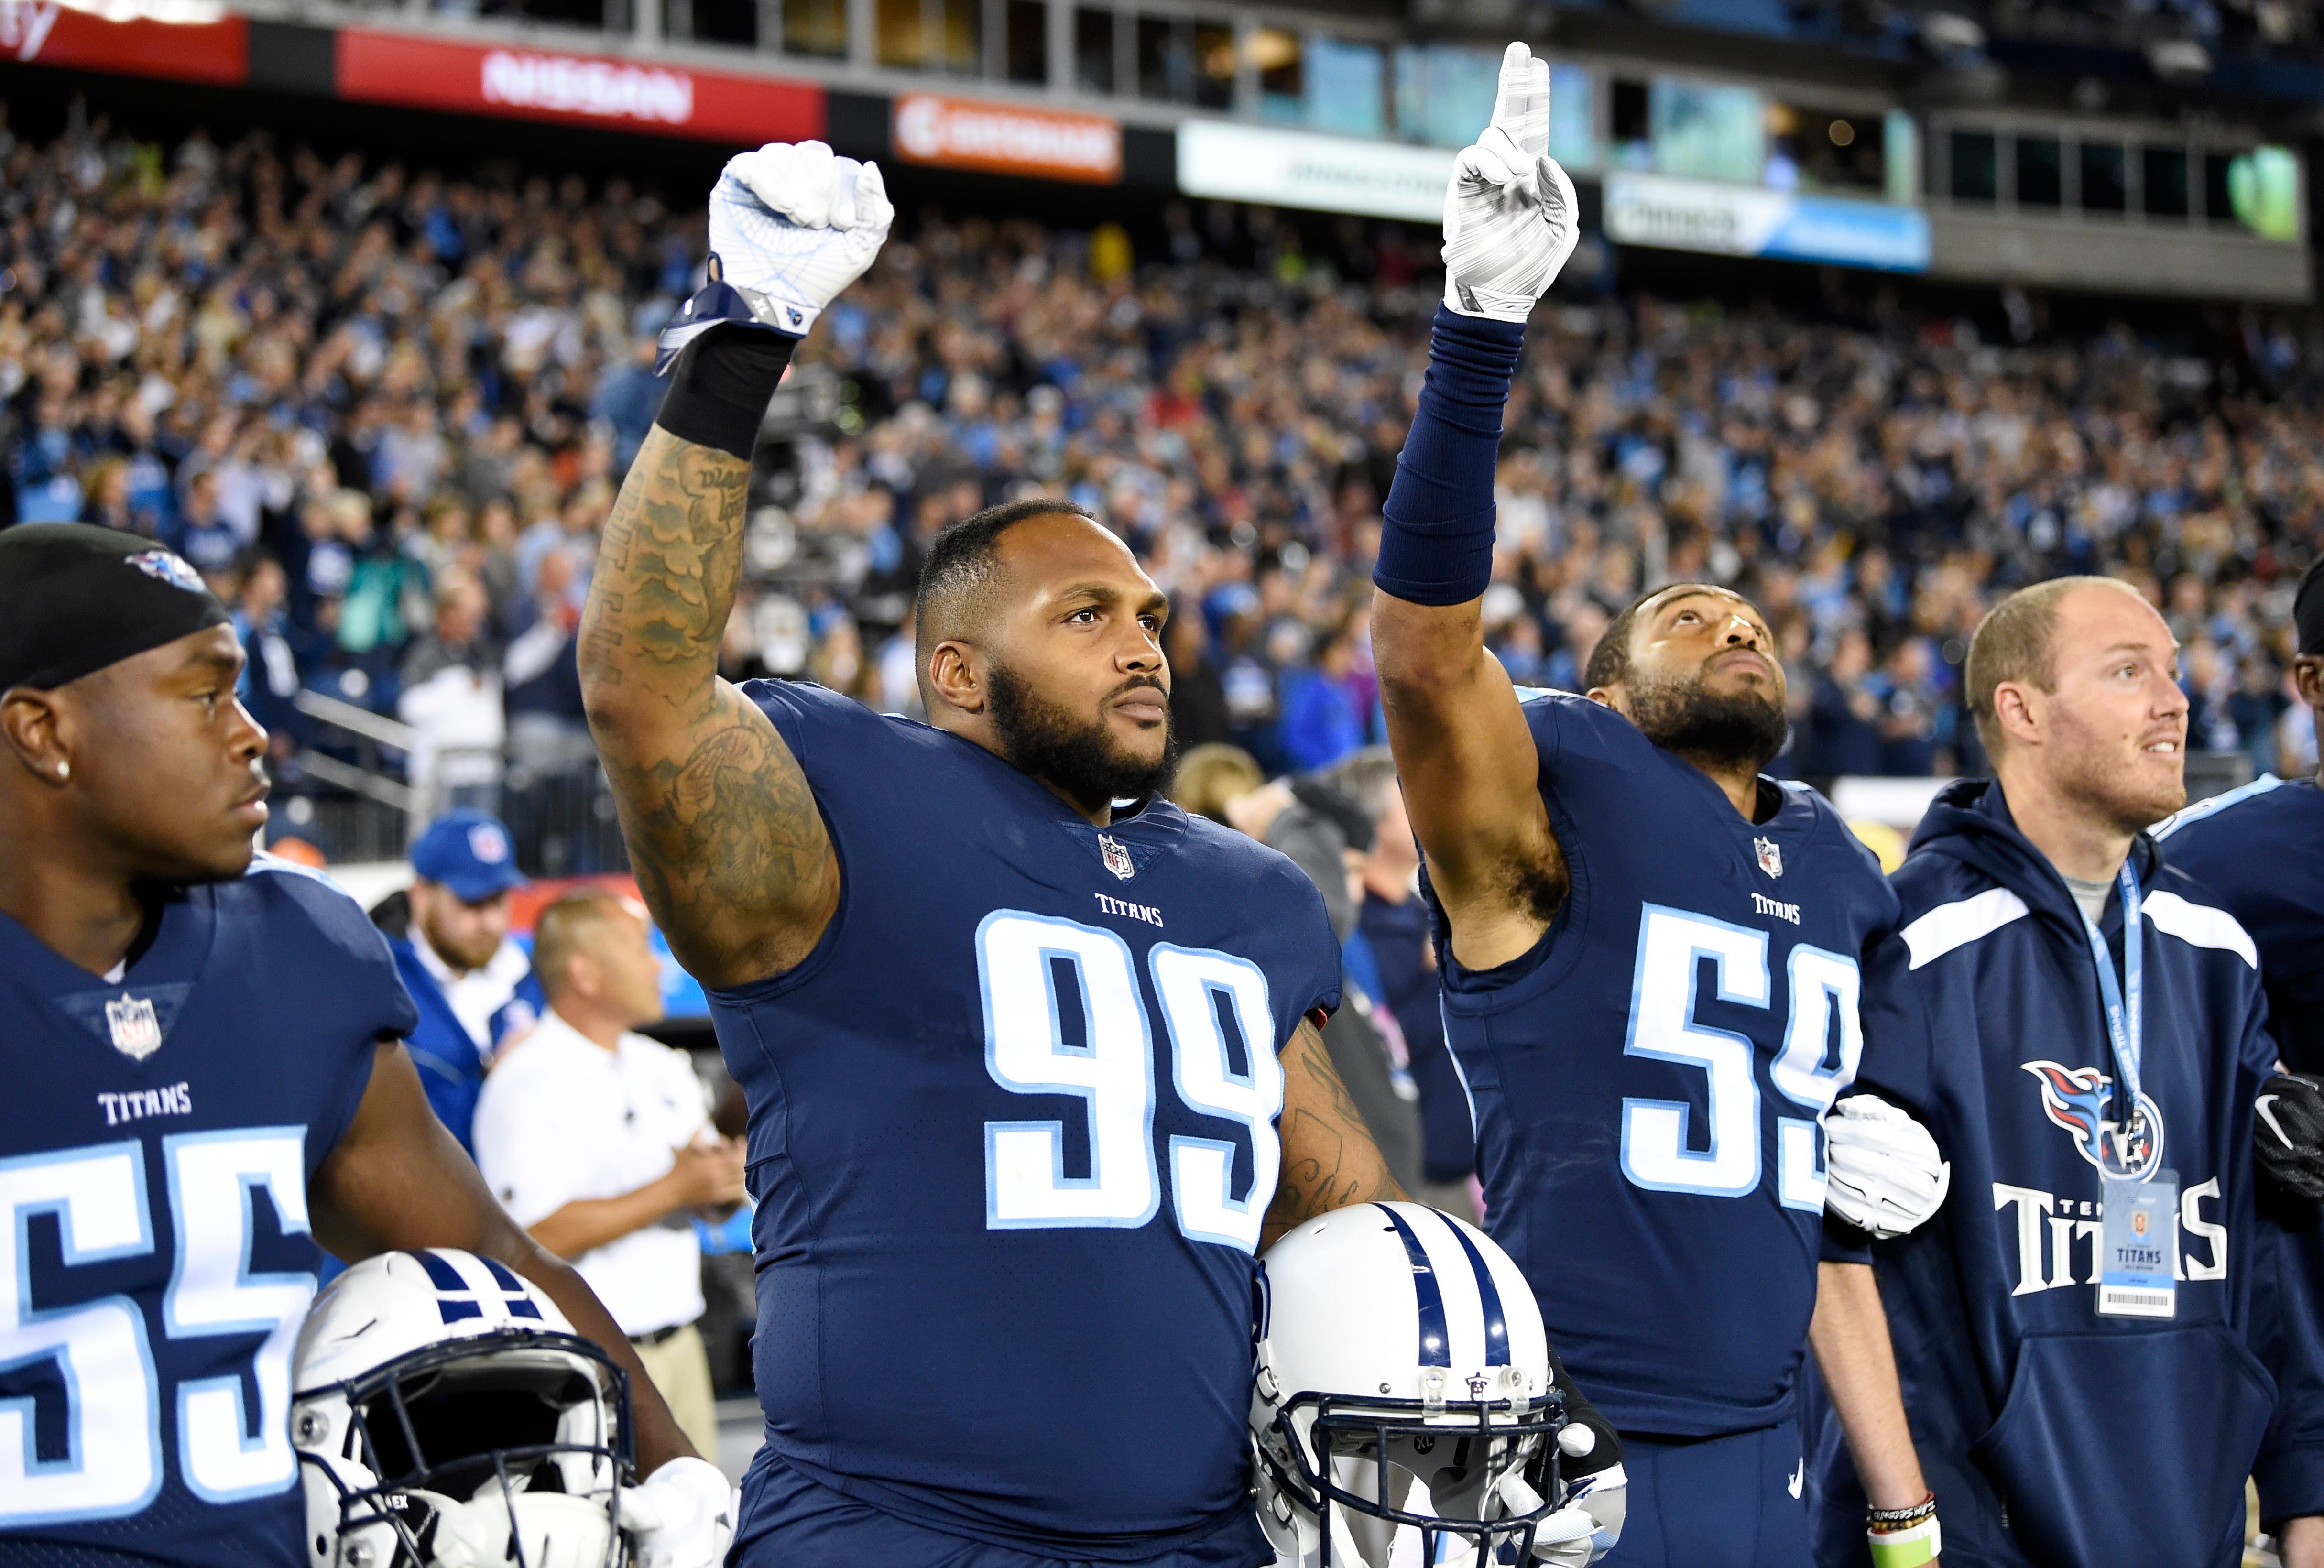 Titans' Jurrell Casey to protest during national anthem: 'I'm going to take my fine'